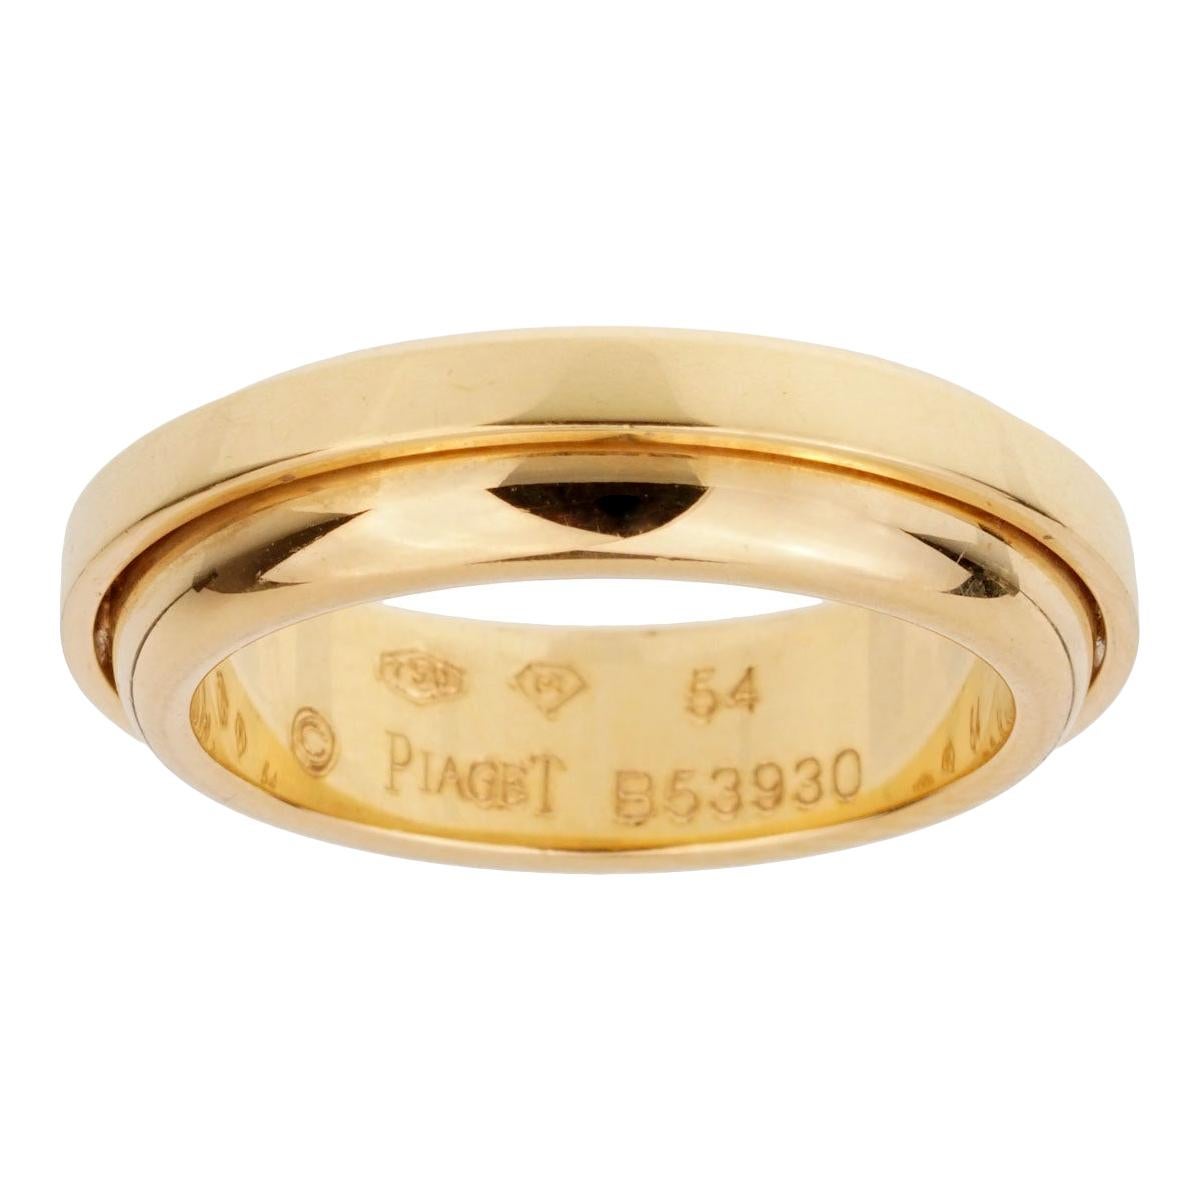 Piaget Possession Yellow Gold Band Ring